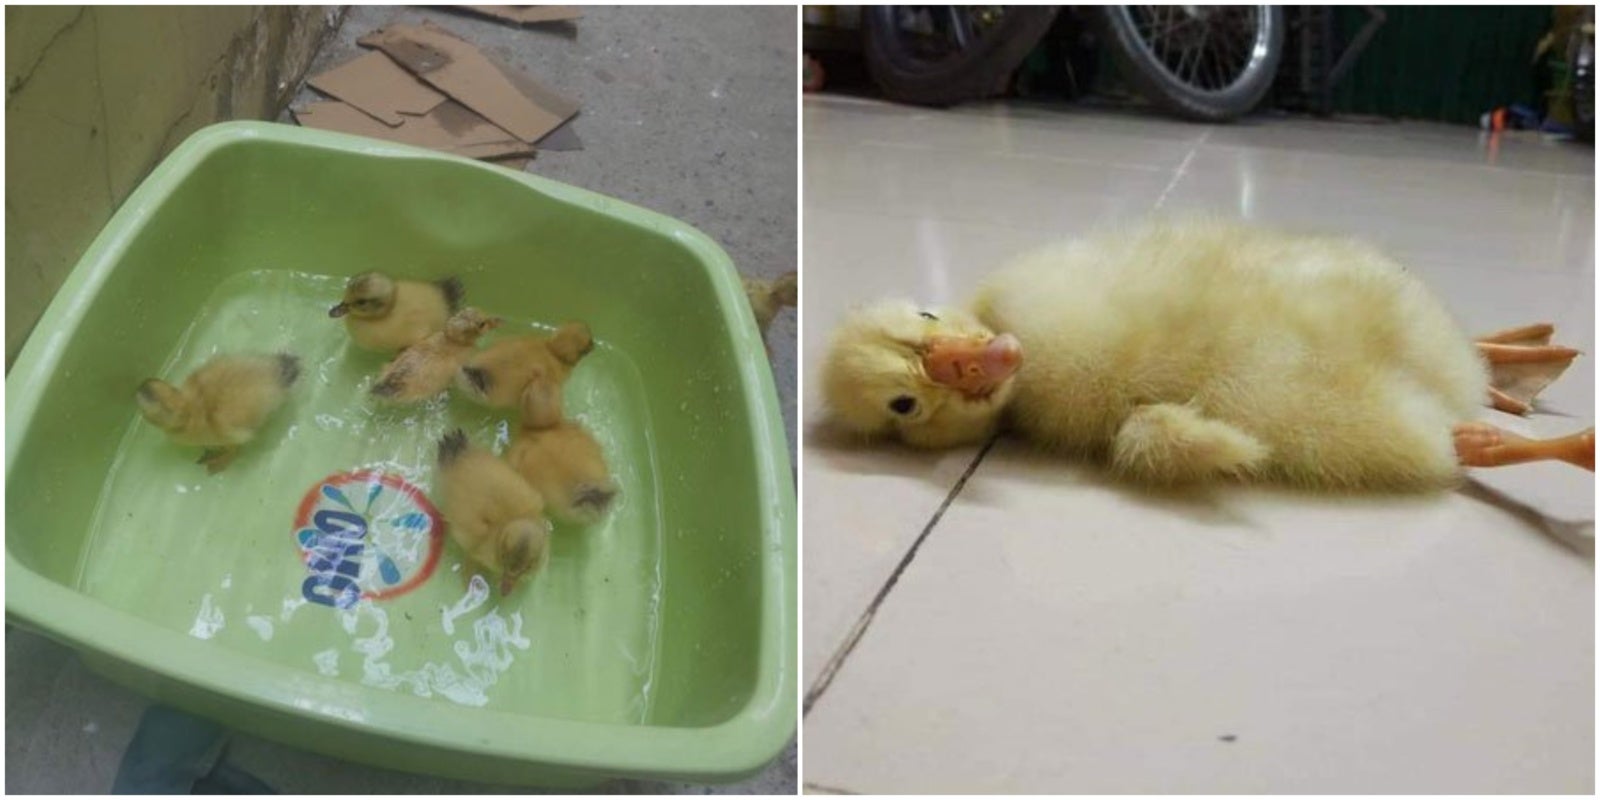 Woman Buys Duck Eggs To Consume, Gets Ducklings Instead When Hot Weather Causes Them To Hatch - World Of Buzz